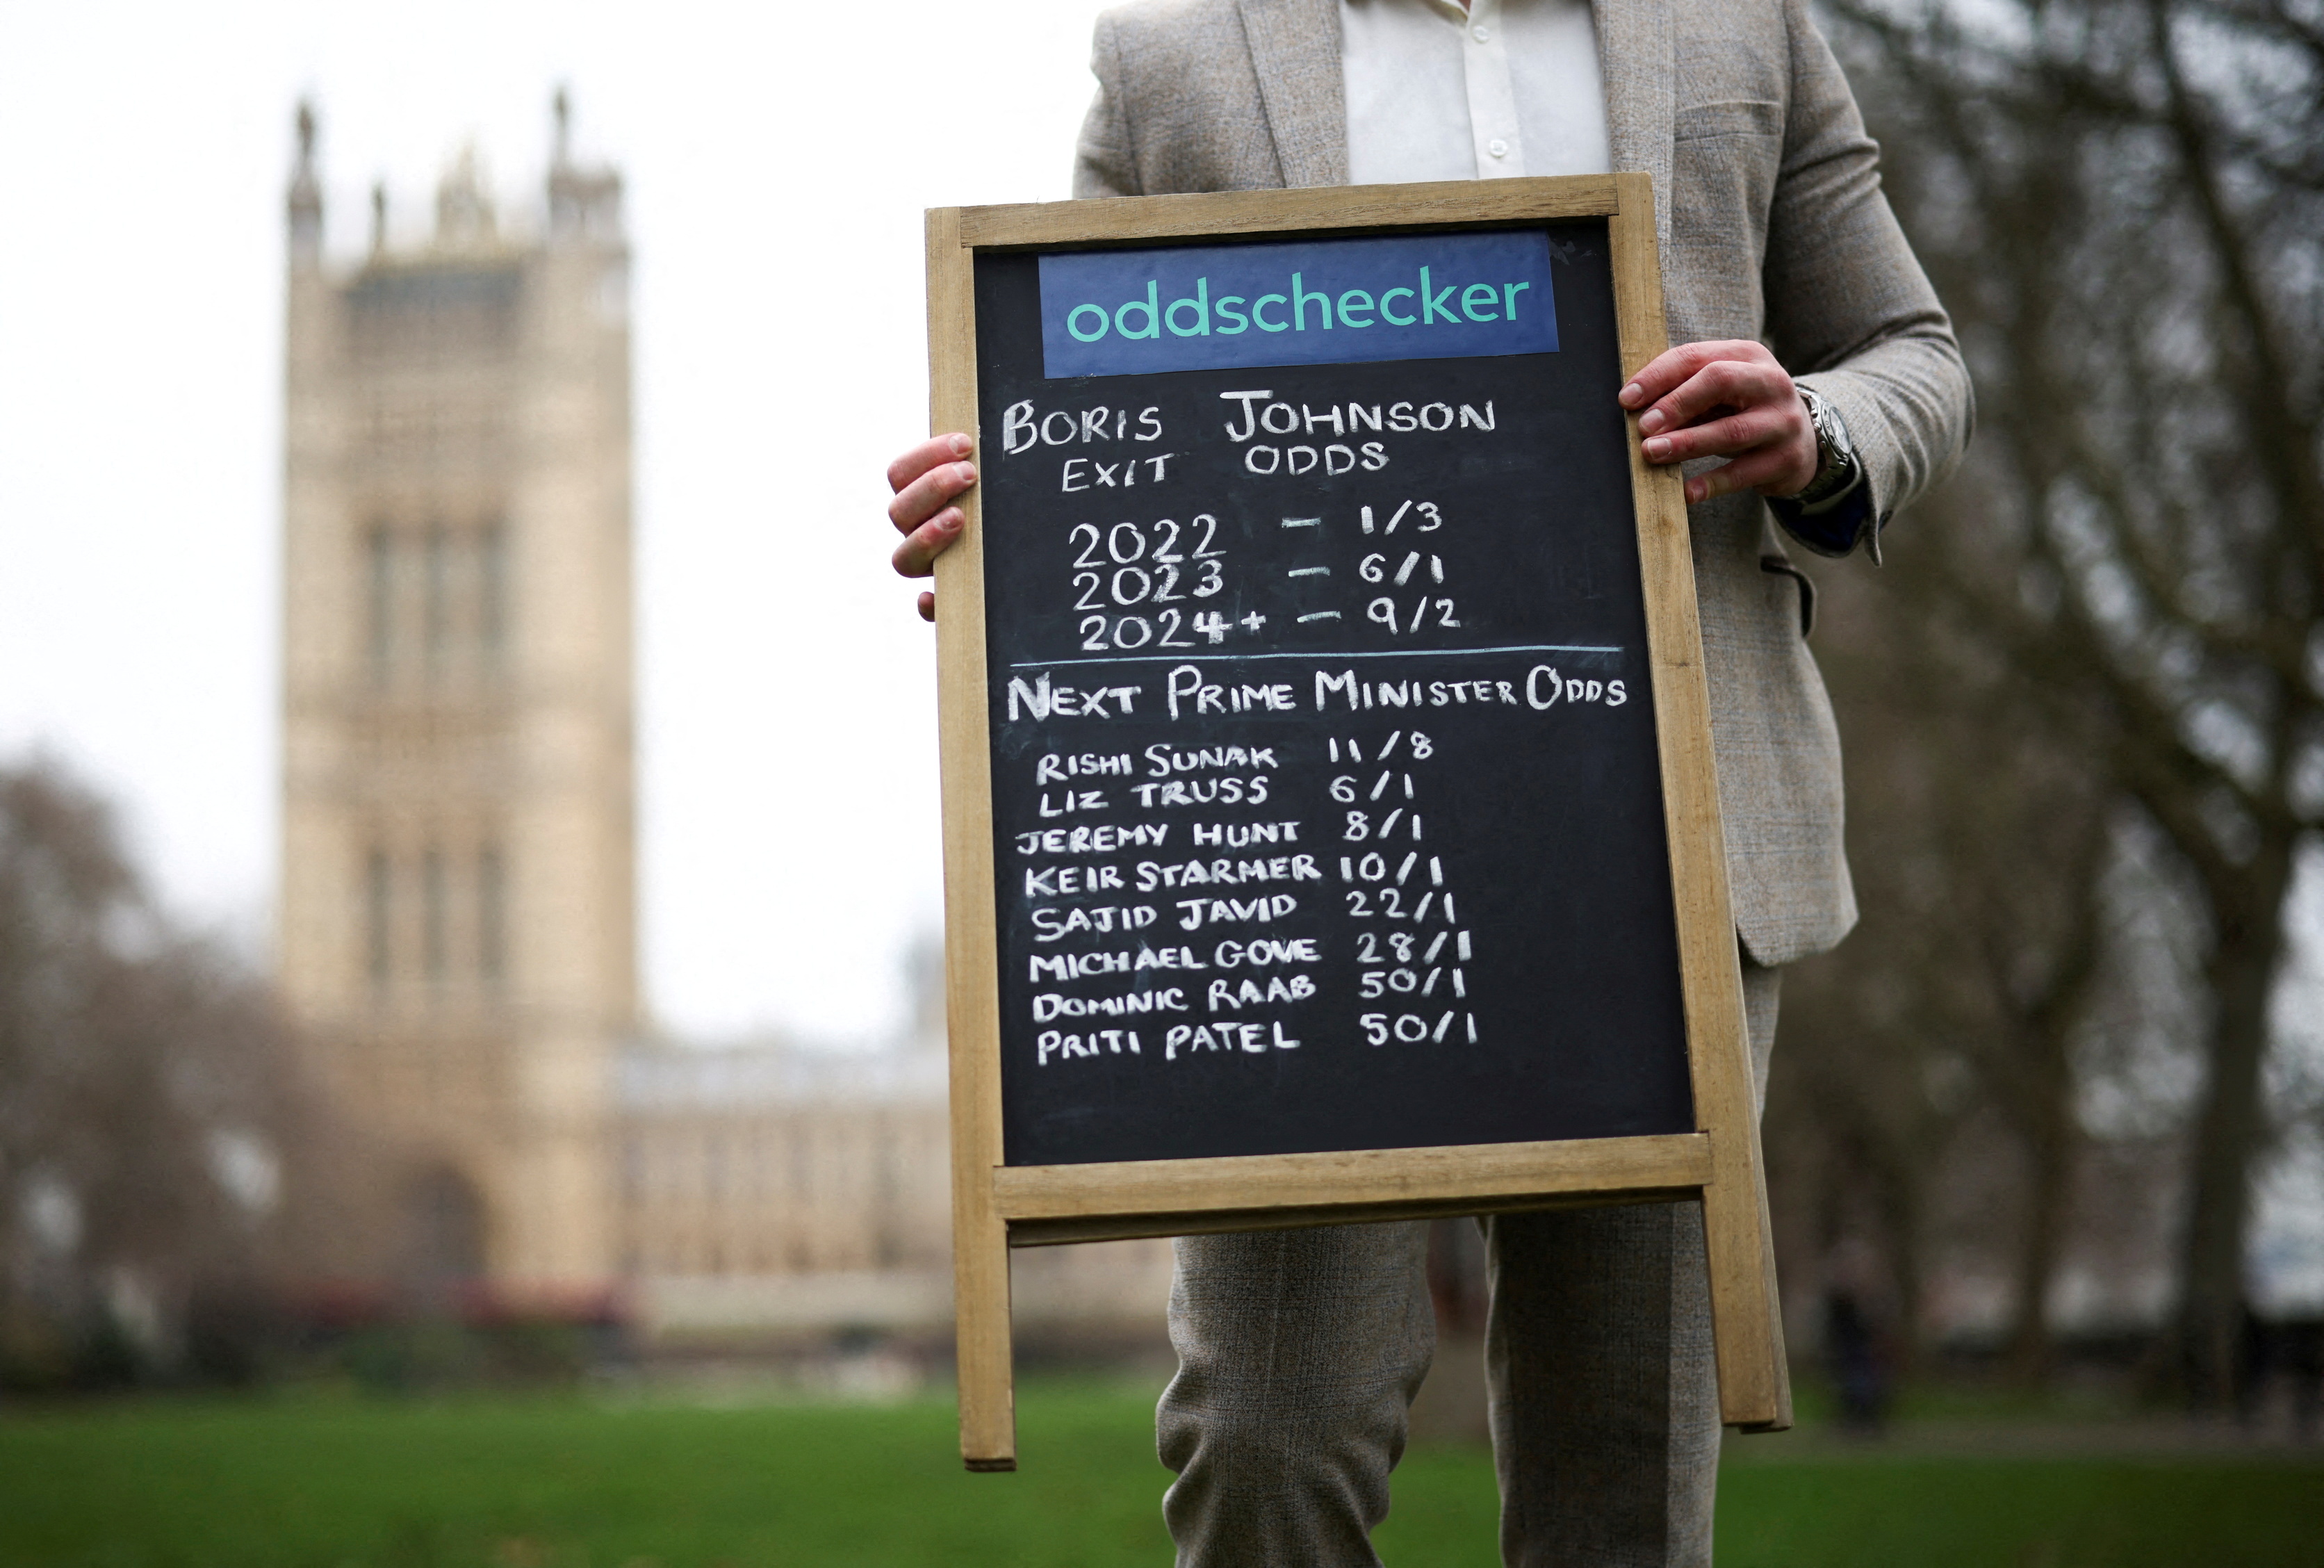 Betting odds for British Prime Minister Boris Johnson exiting his position as Prime Minister and odds for who would replace him